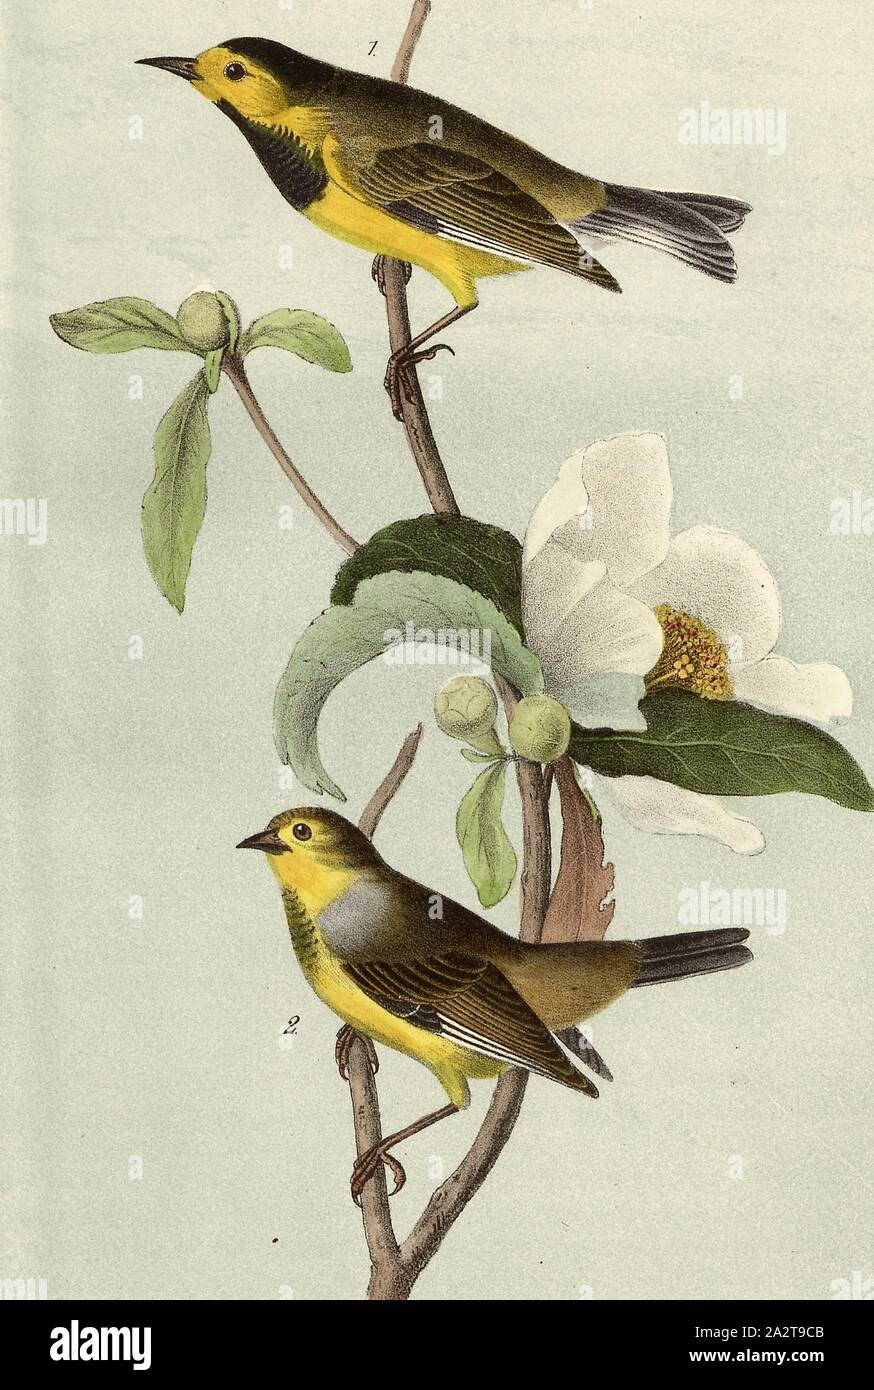 Bachman's Swamp Warbler - Gordonia pubescens, Yellow-fronted Warbler (Vermivora bachmanii, Helinaia bachmanii), Franklinie (Franklinia alatamaha), Signed: J.J. Audubon, J.T. Bowen, lithograph, Pl. 108 (vol. 2), Audubon, John James (drawn); Bowen, J. T. (lith.), 1856, John James Audubon: The birds of America: from drawings made in the United States and their territories. New York: Audubon, 1856 Stock Photo